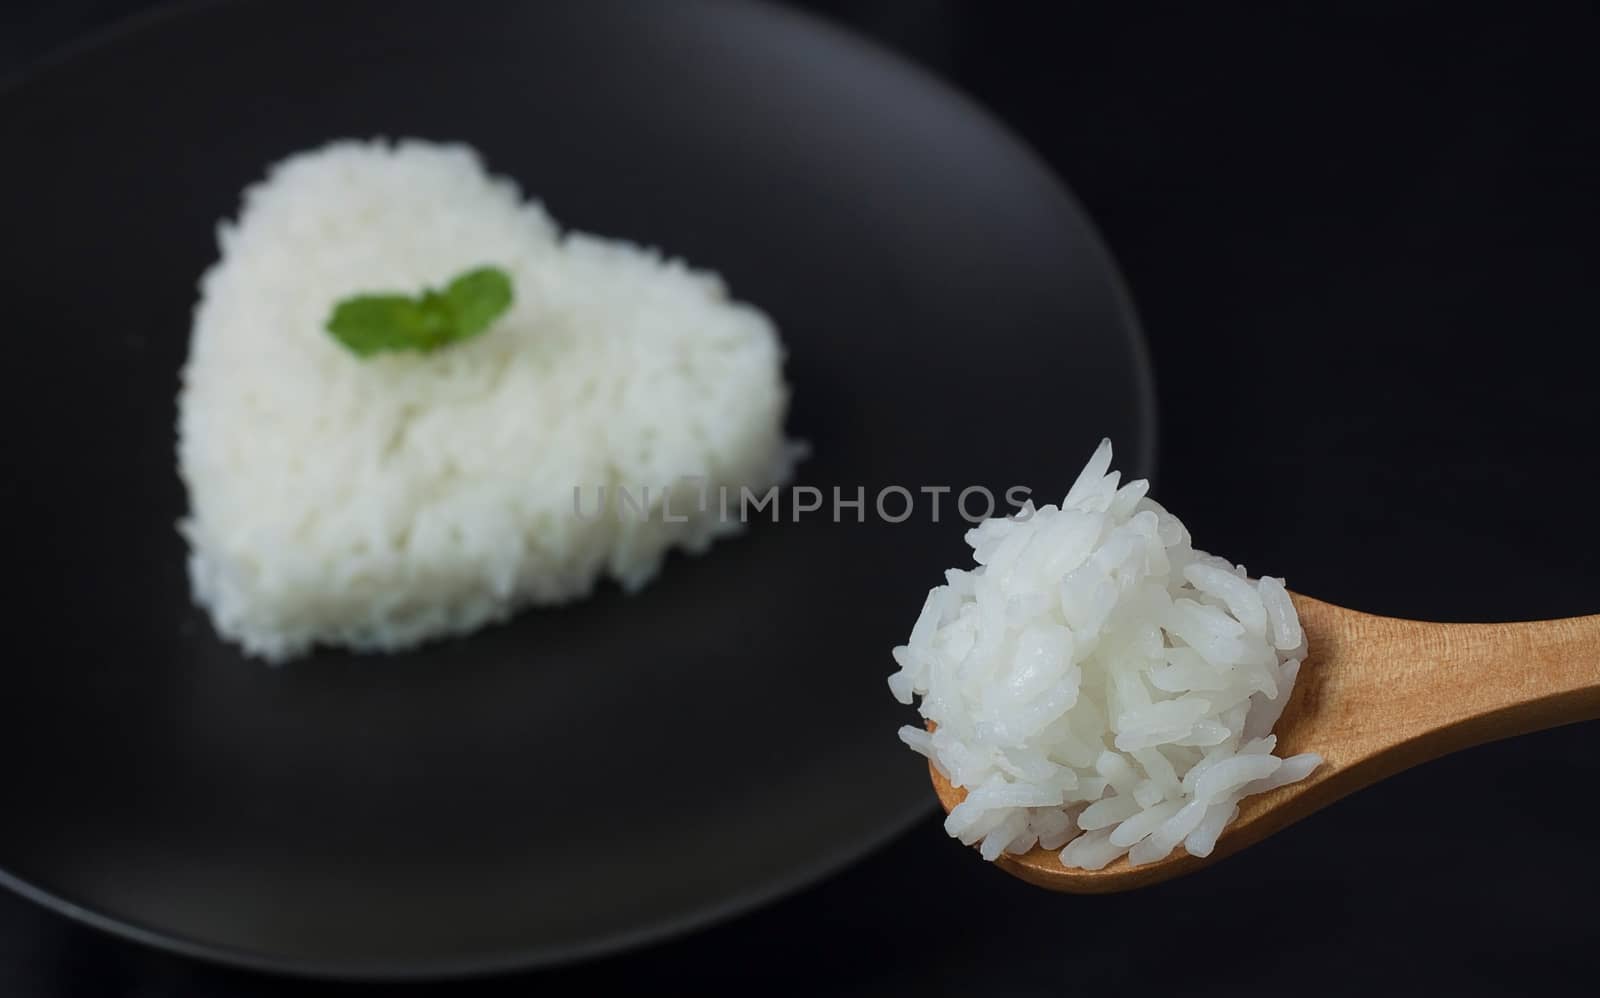 hot cook jasmine rice on spoon serve with smoke. rice heart shape on black dish for background. selective focus by asiandelight